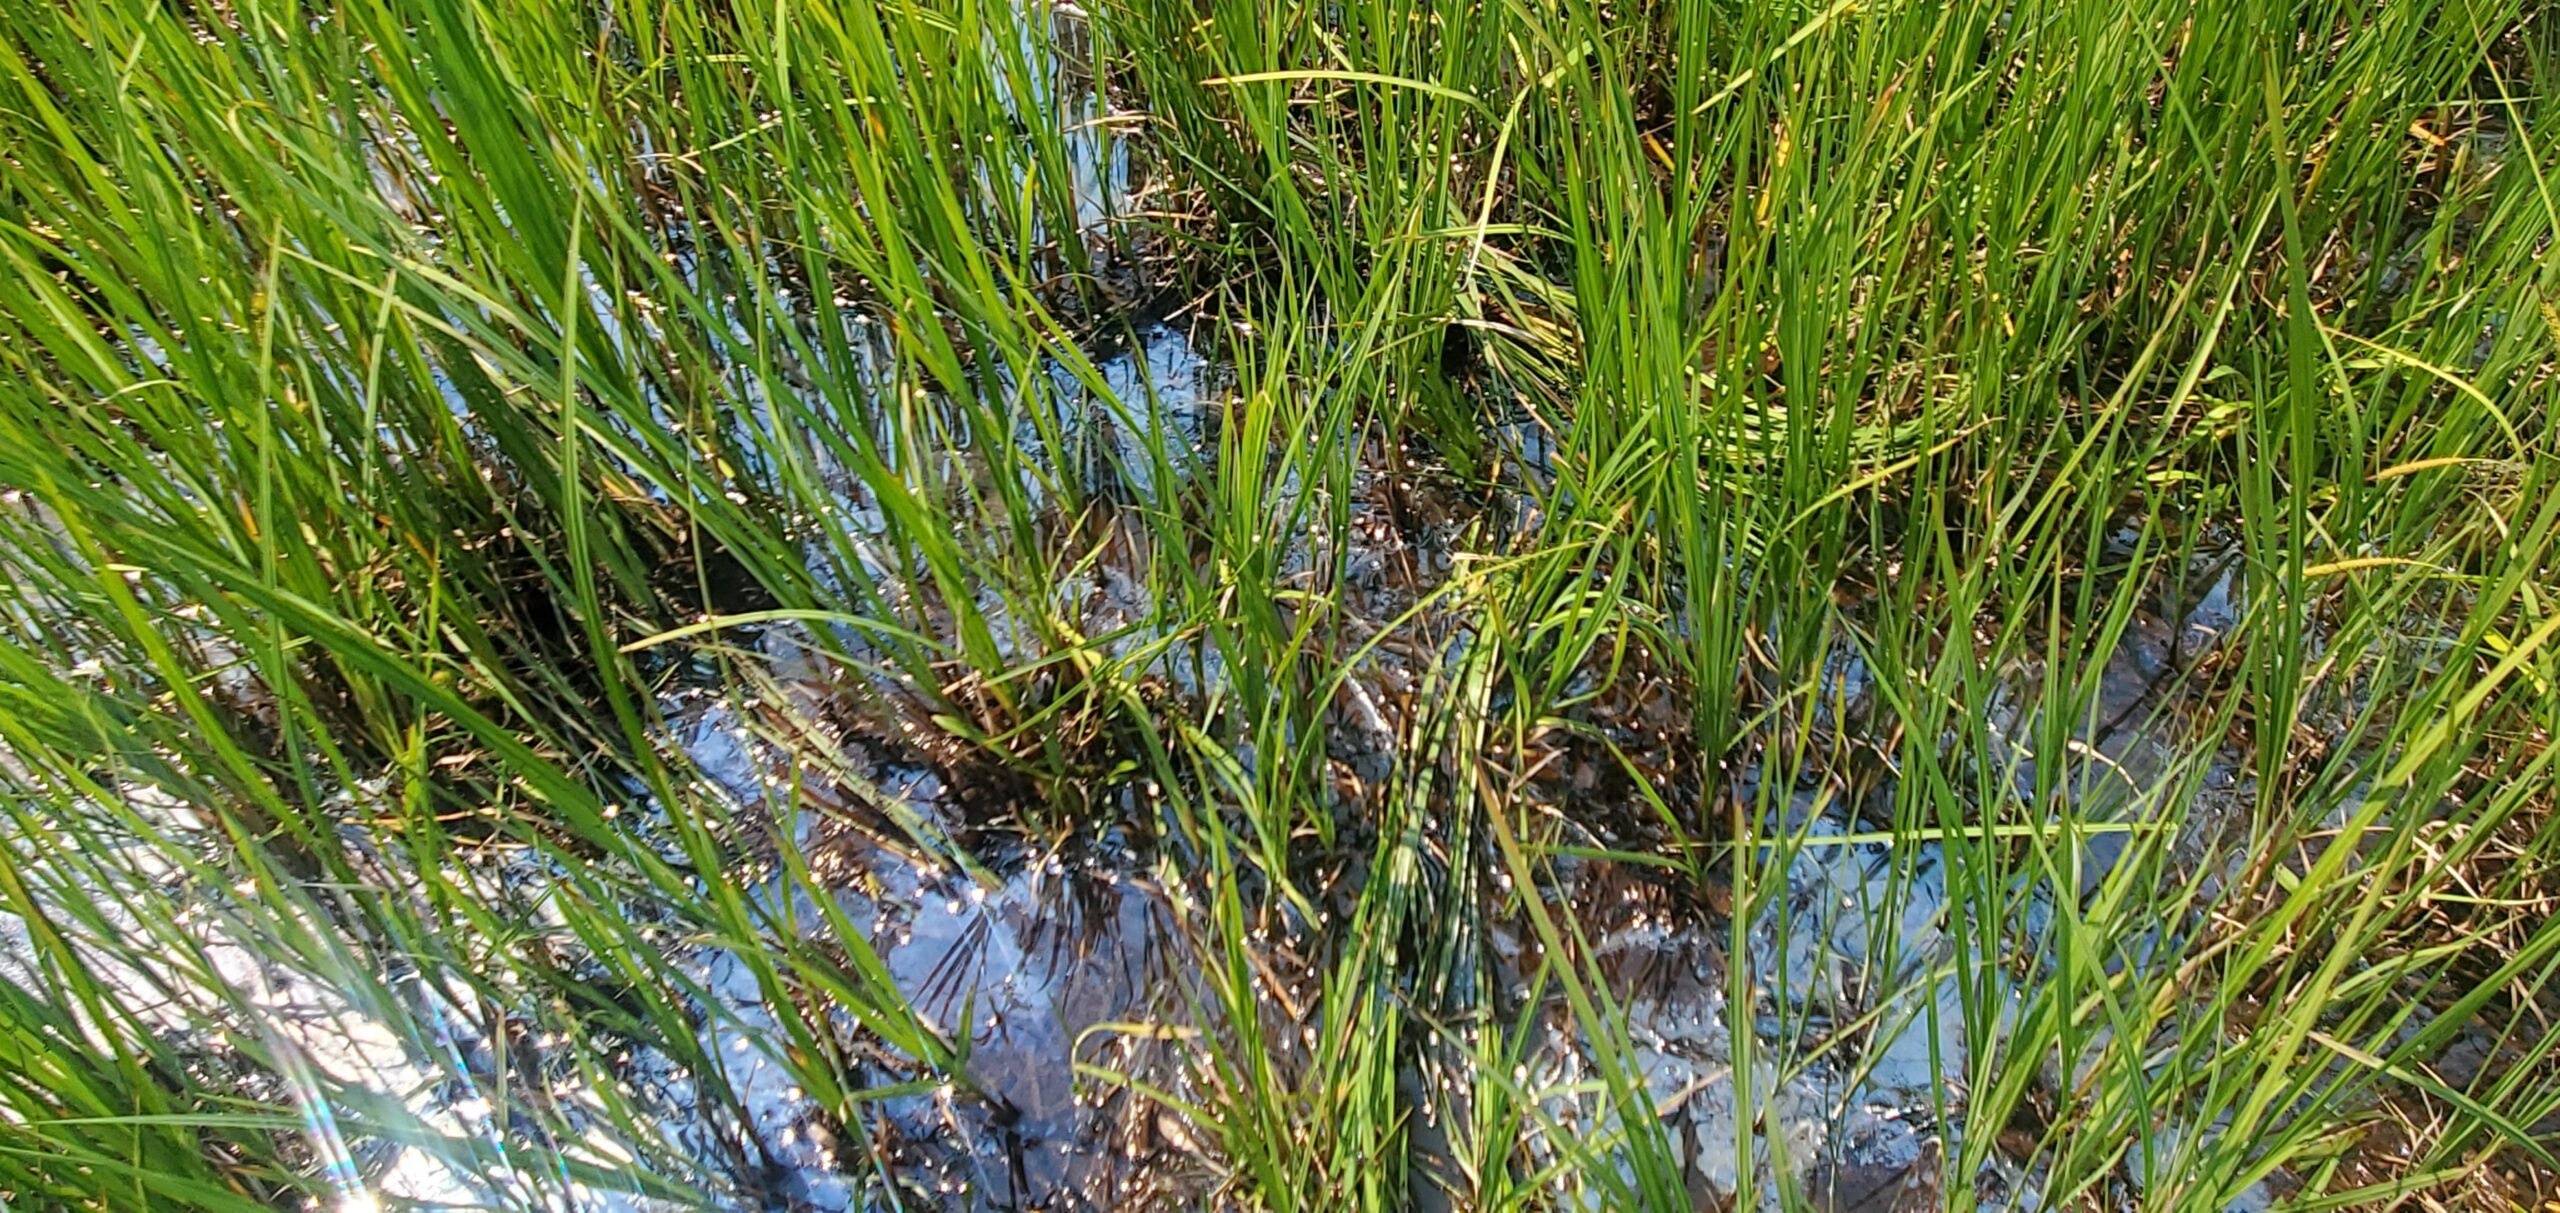 Close up of a wetland. Green grass is growing in standing water that is reflecting the light of the sun. It looks lush.